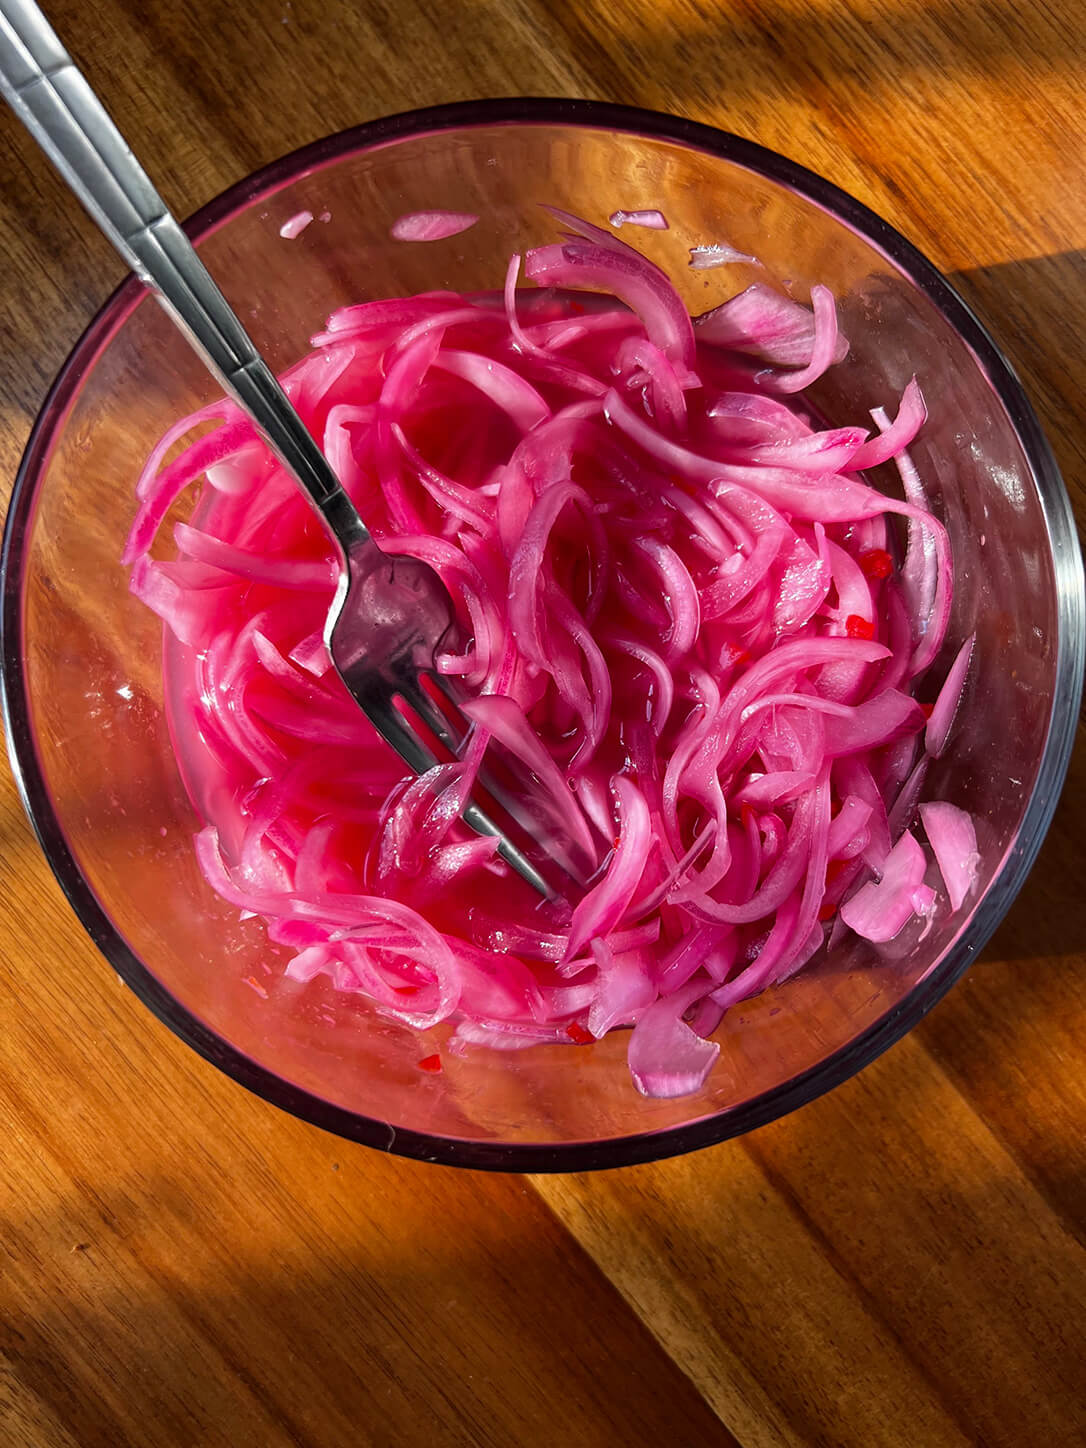 https://cafehailee.com/wp-content/uploads/2022/09/easy-pickled-red-onions.jpg